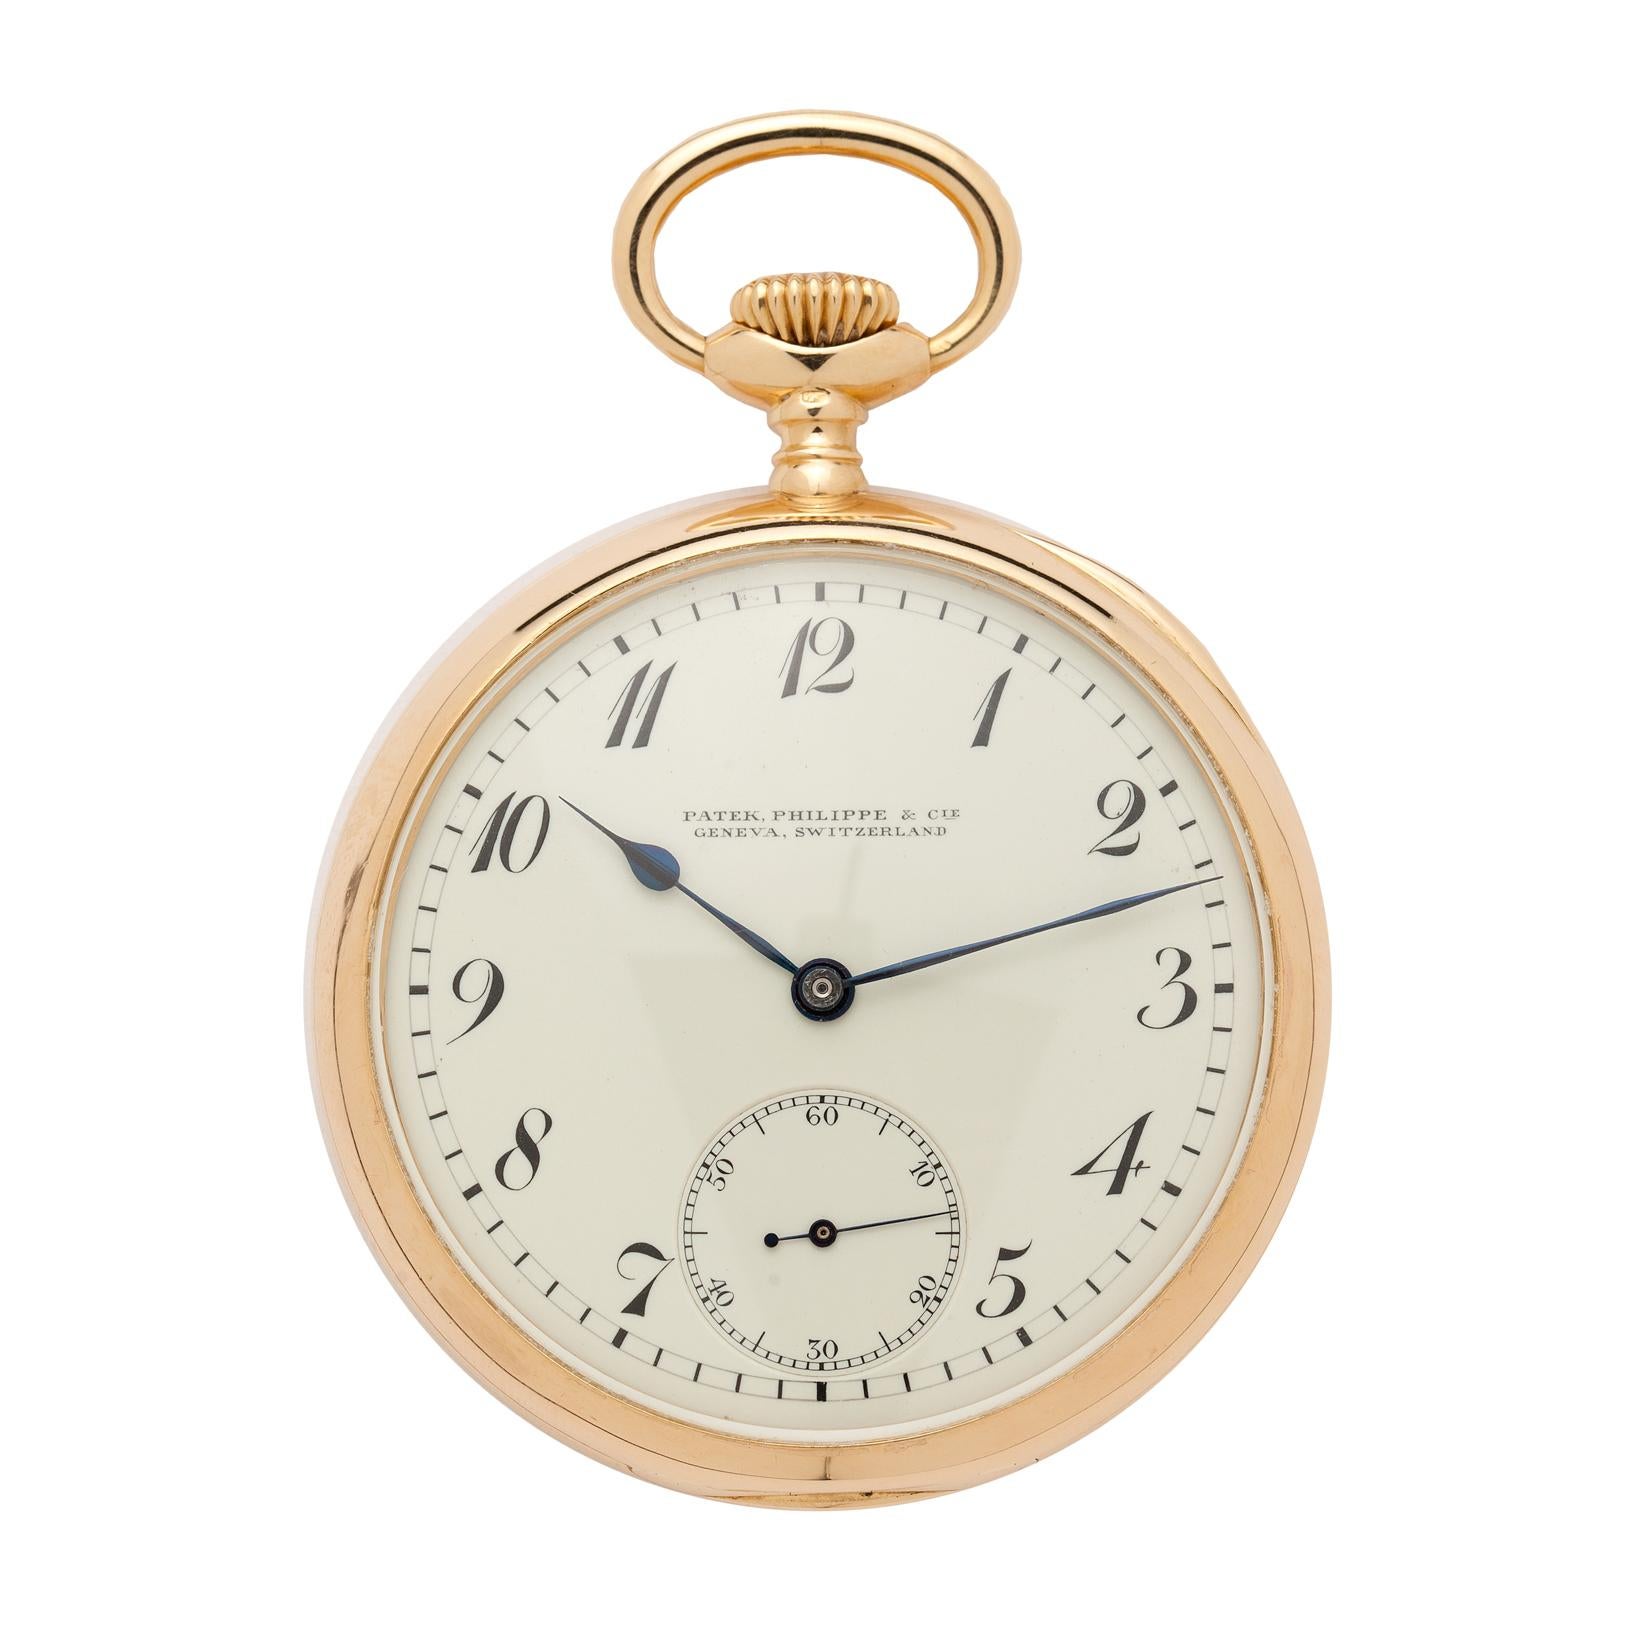 This rare antique 18Kt Yellow Gold Pocket Watch by Patek Philippe Shreve Crump & Low  with White Face and Black Stylized Arablic Numbers, comes with stylish genuine leather wearable wrist strap, giving the lucky owner the option to utilize the watch